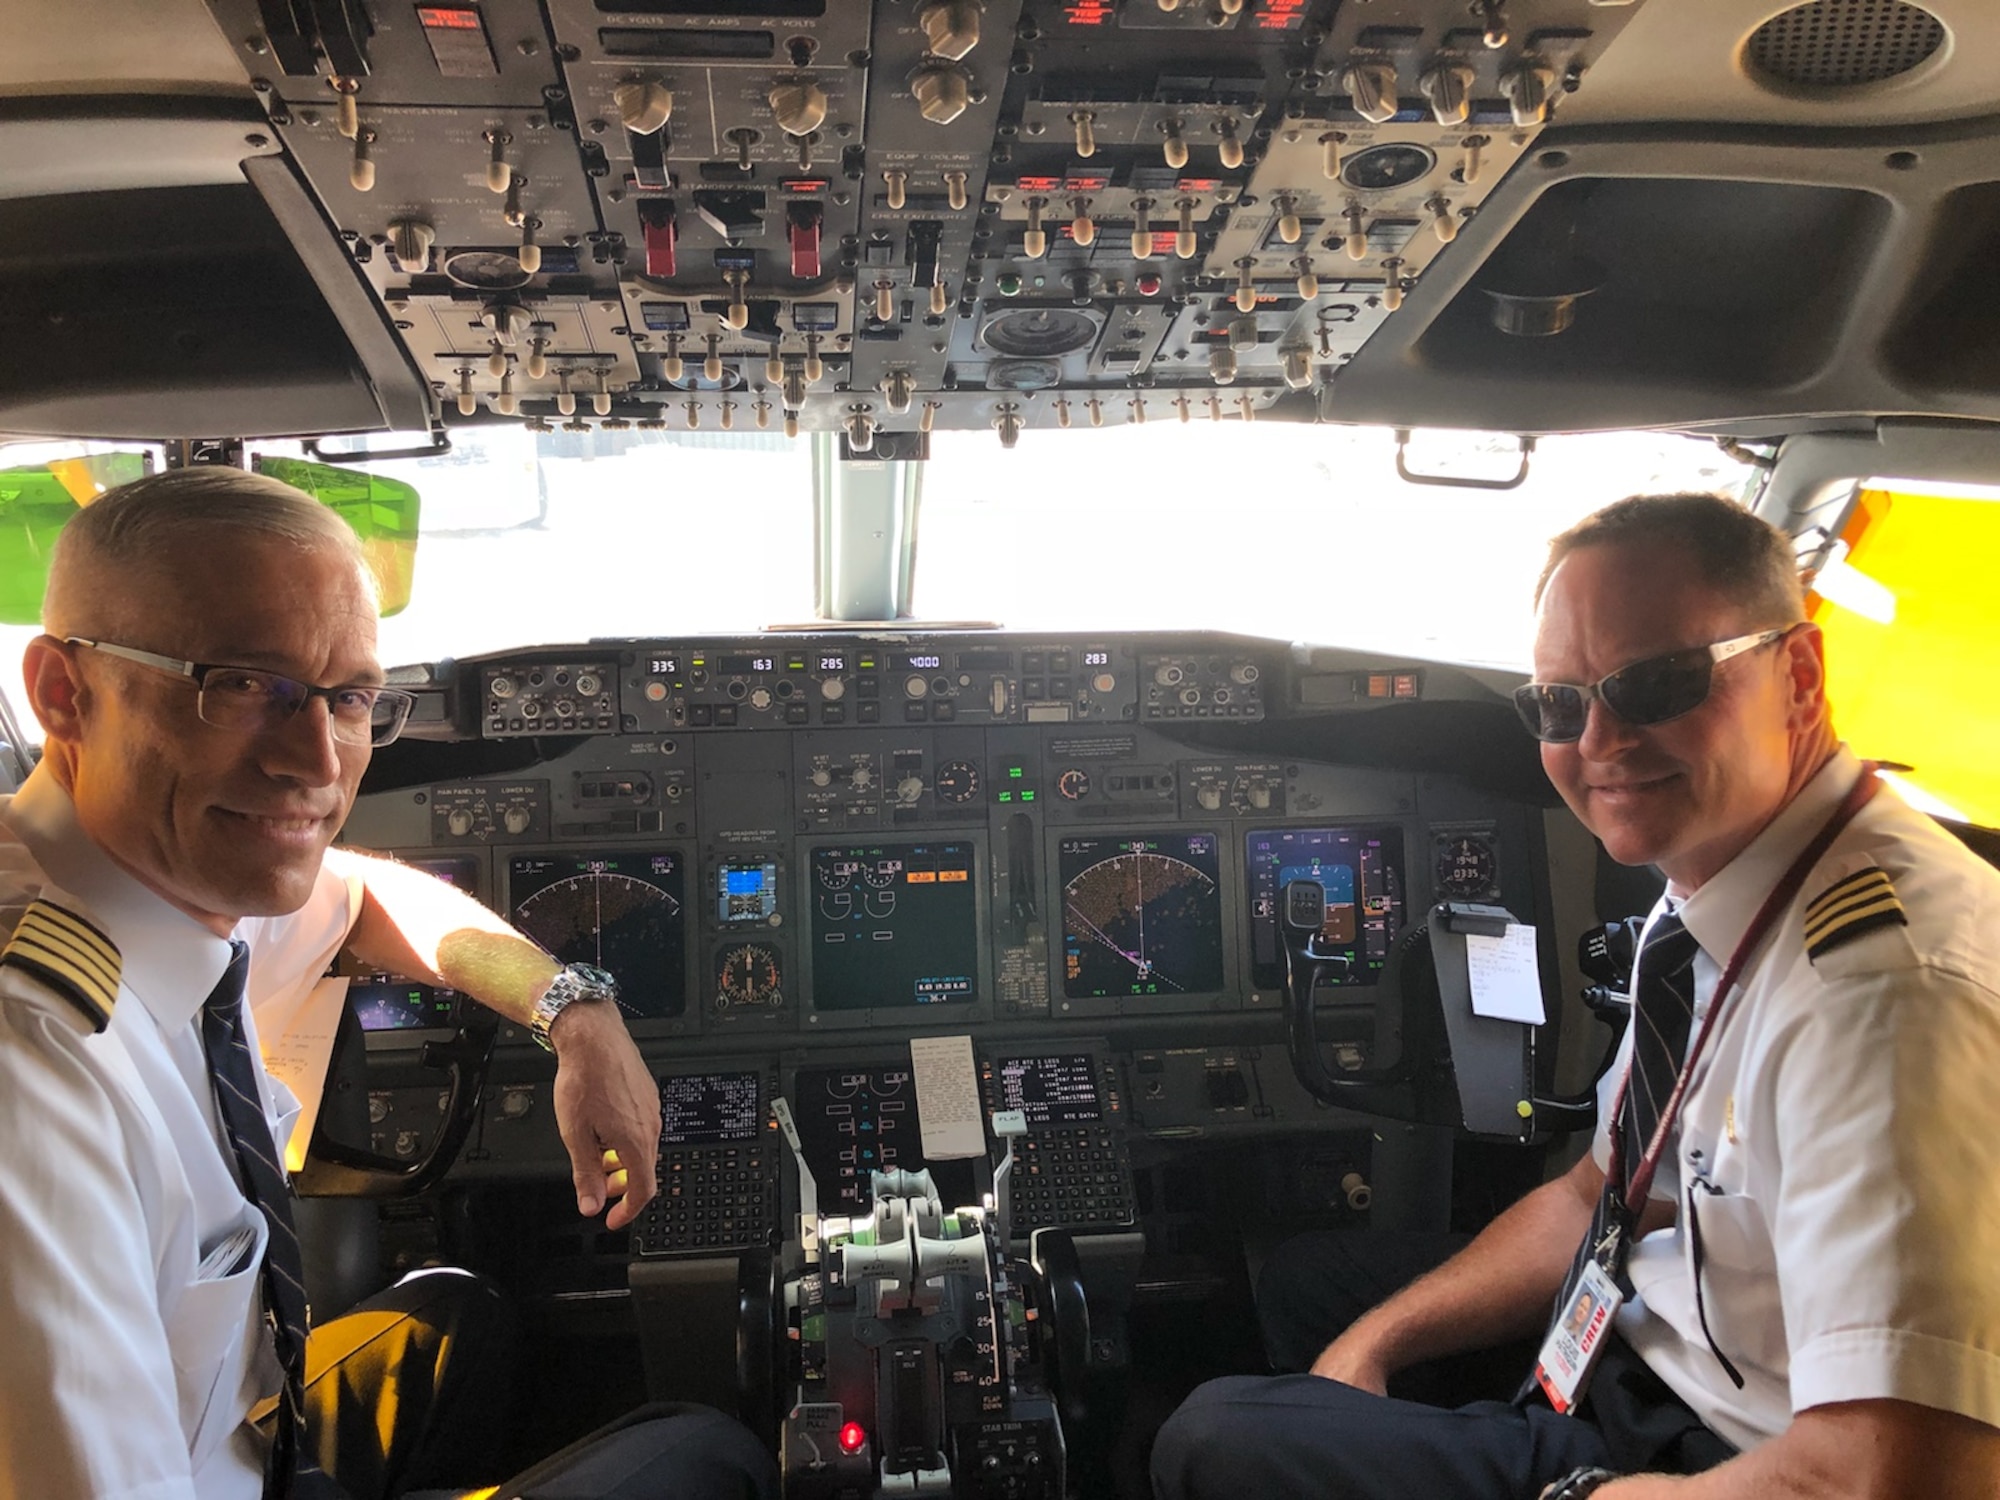 Maj. Gen. Craig La Fave, 22nd Air Force commander, left, poses in the flight deck of a United Airlines Boeing 737 with fellow Air Force Reservist and former 22nd AF vice commander, retired Air Force Col. Louis Patriquin, during an airline trip in July 2018. (Courtesy photo)